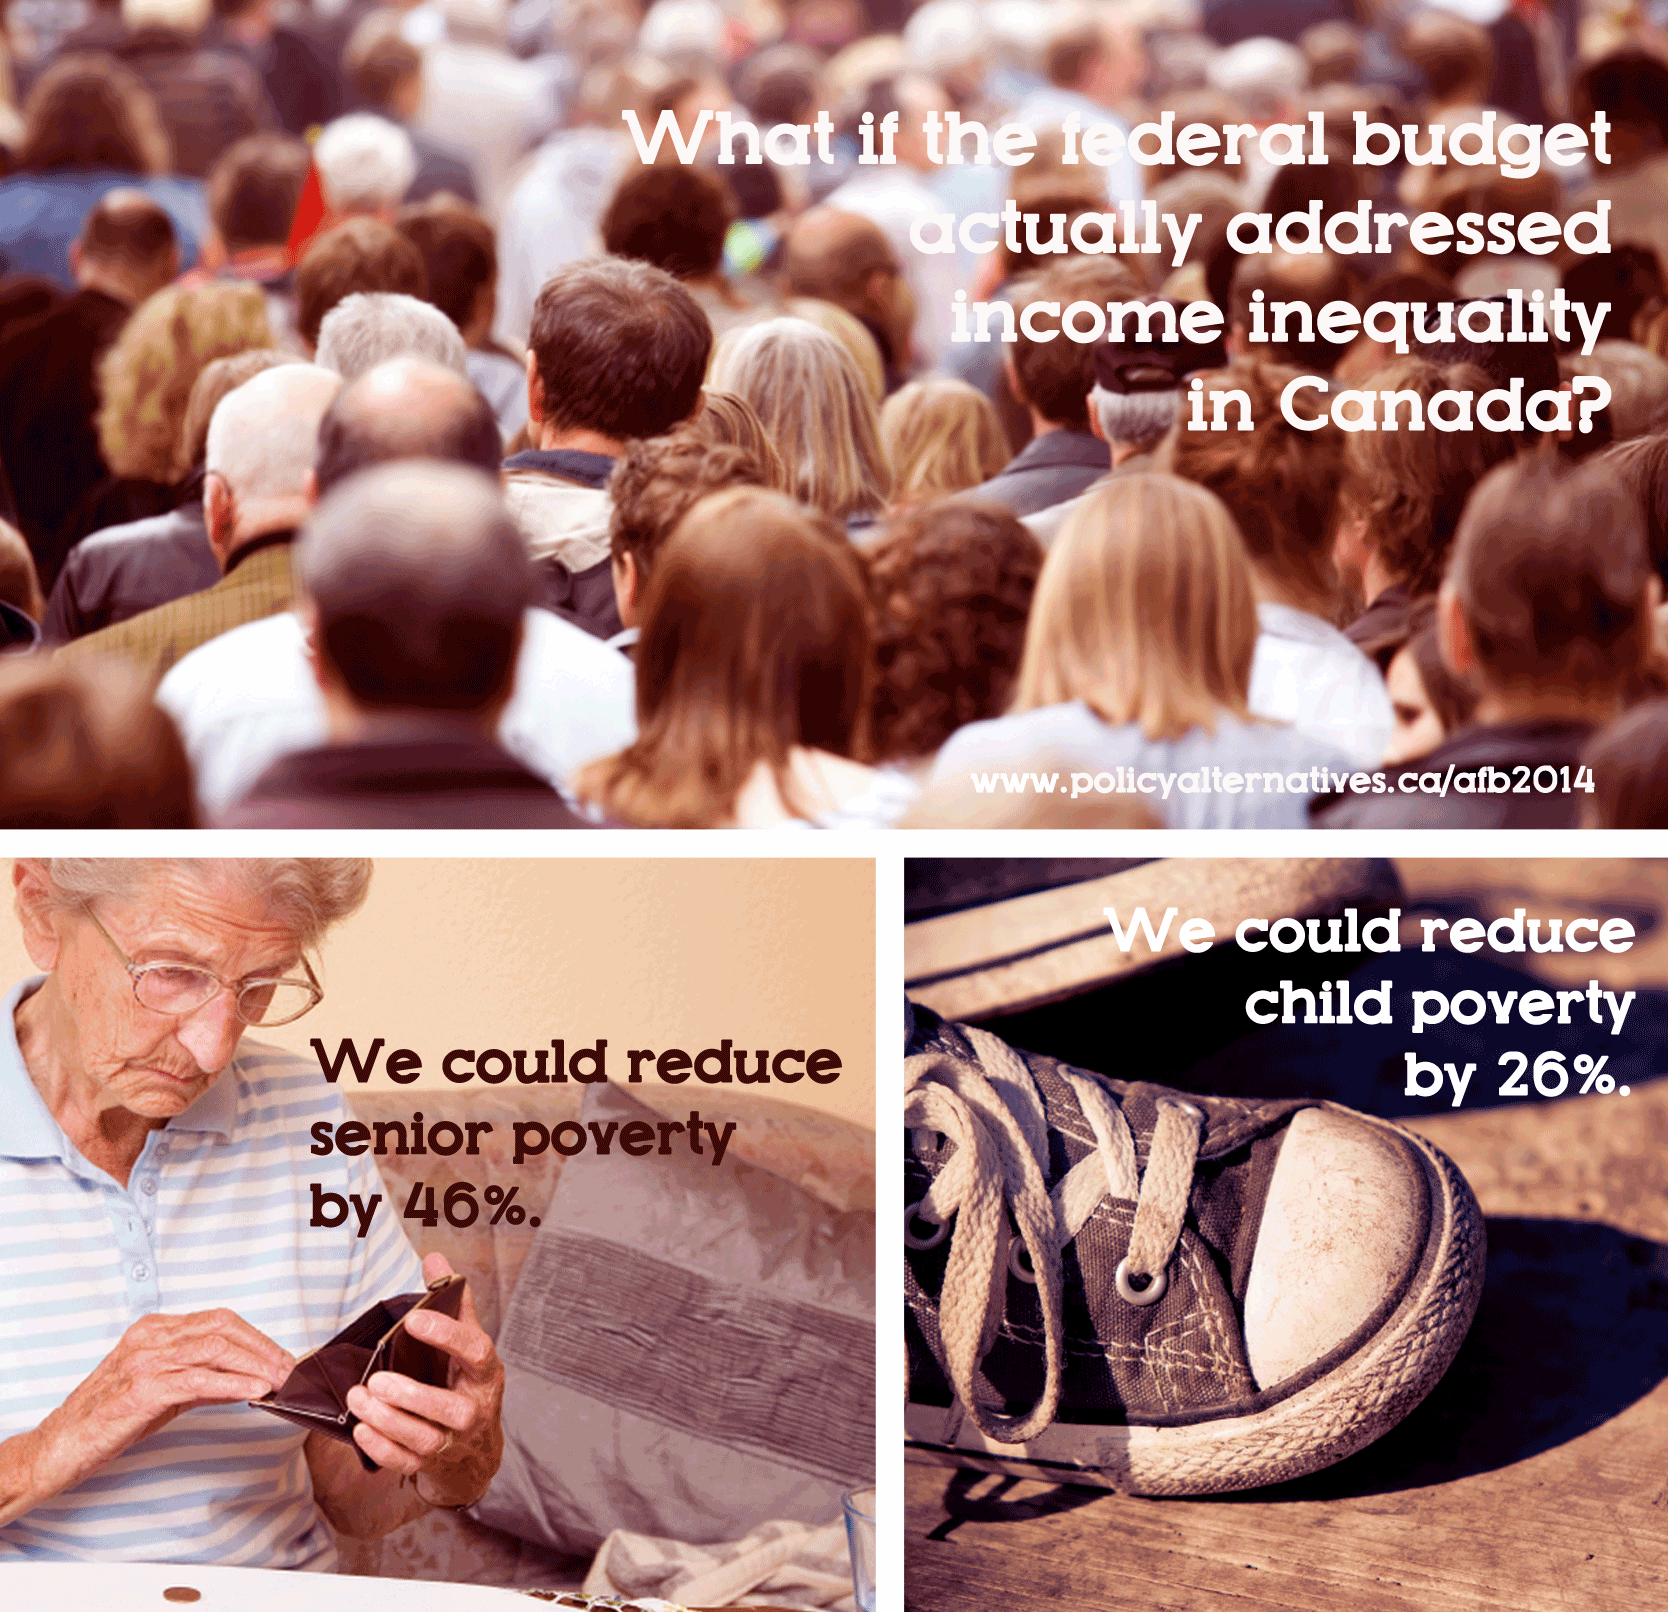 We could reduce senior poverty by 46%